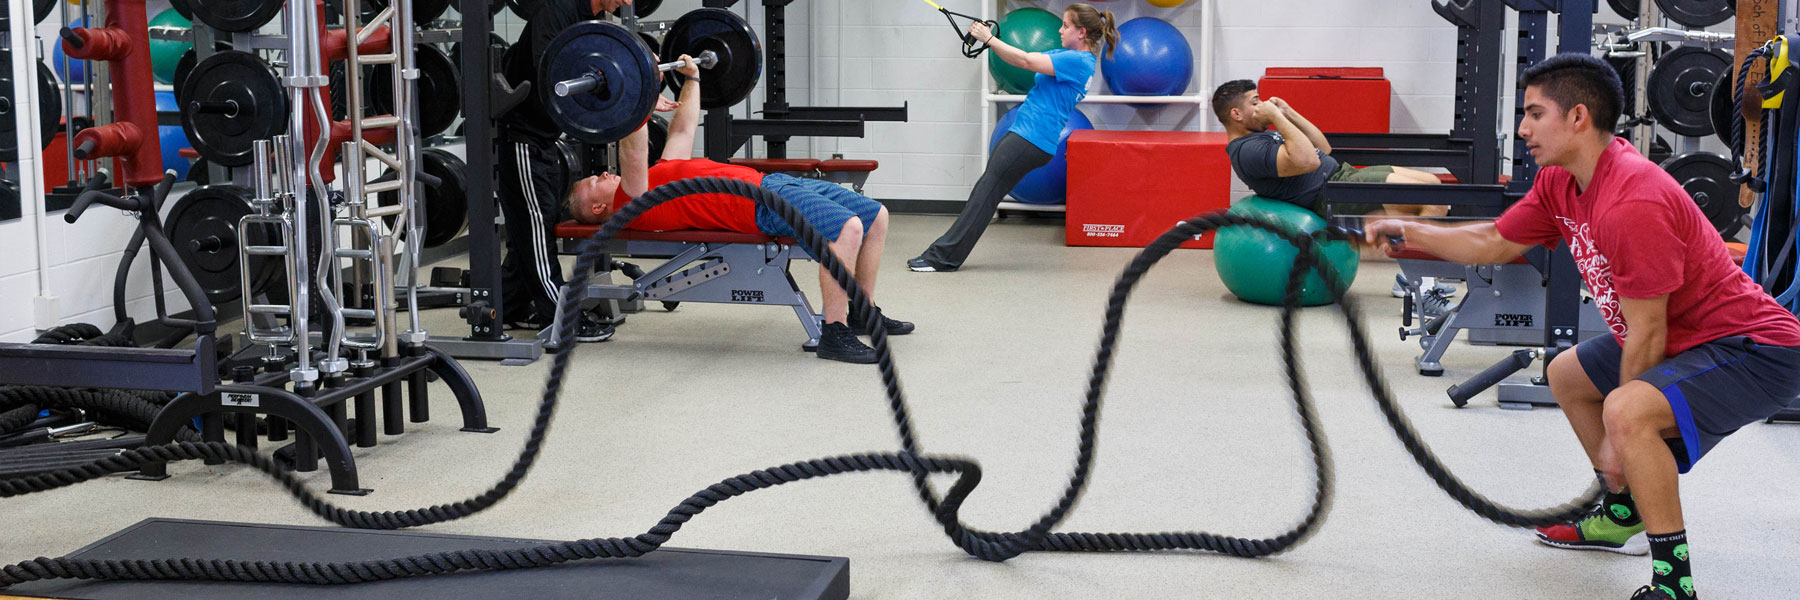 picture of students working out in a gym